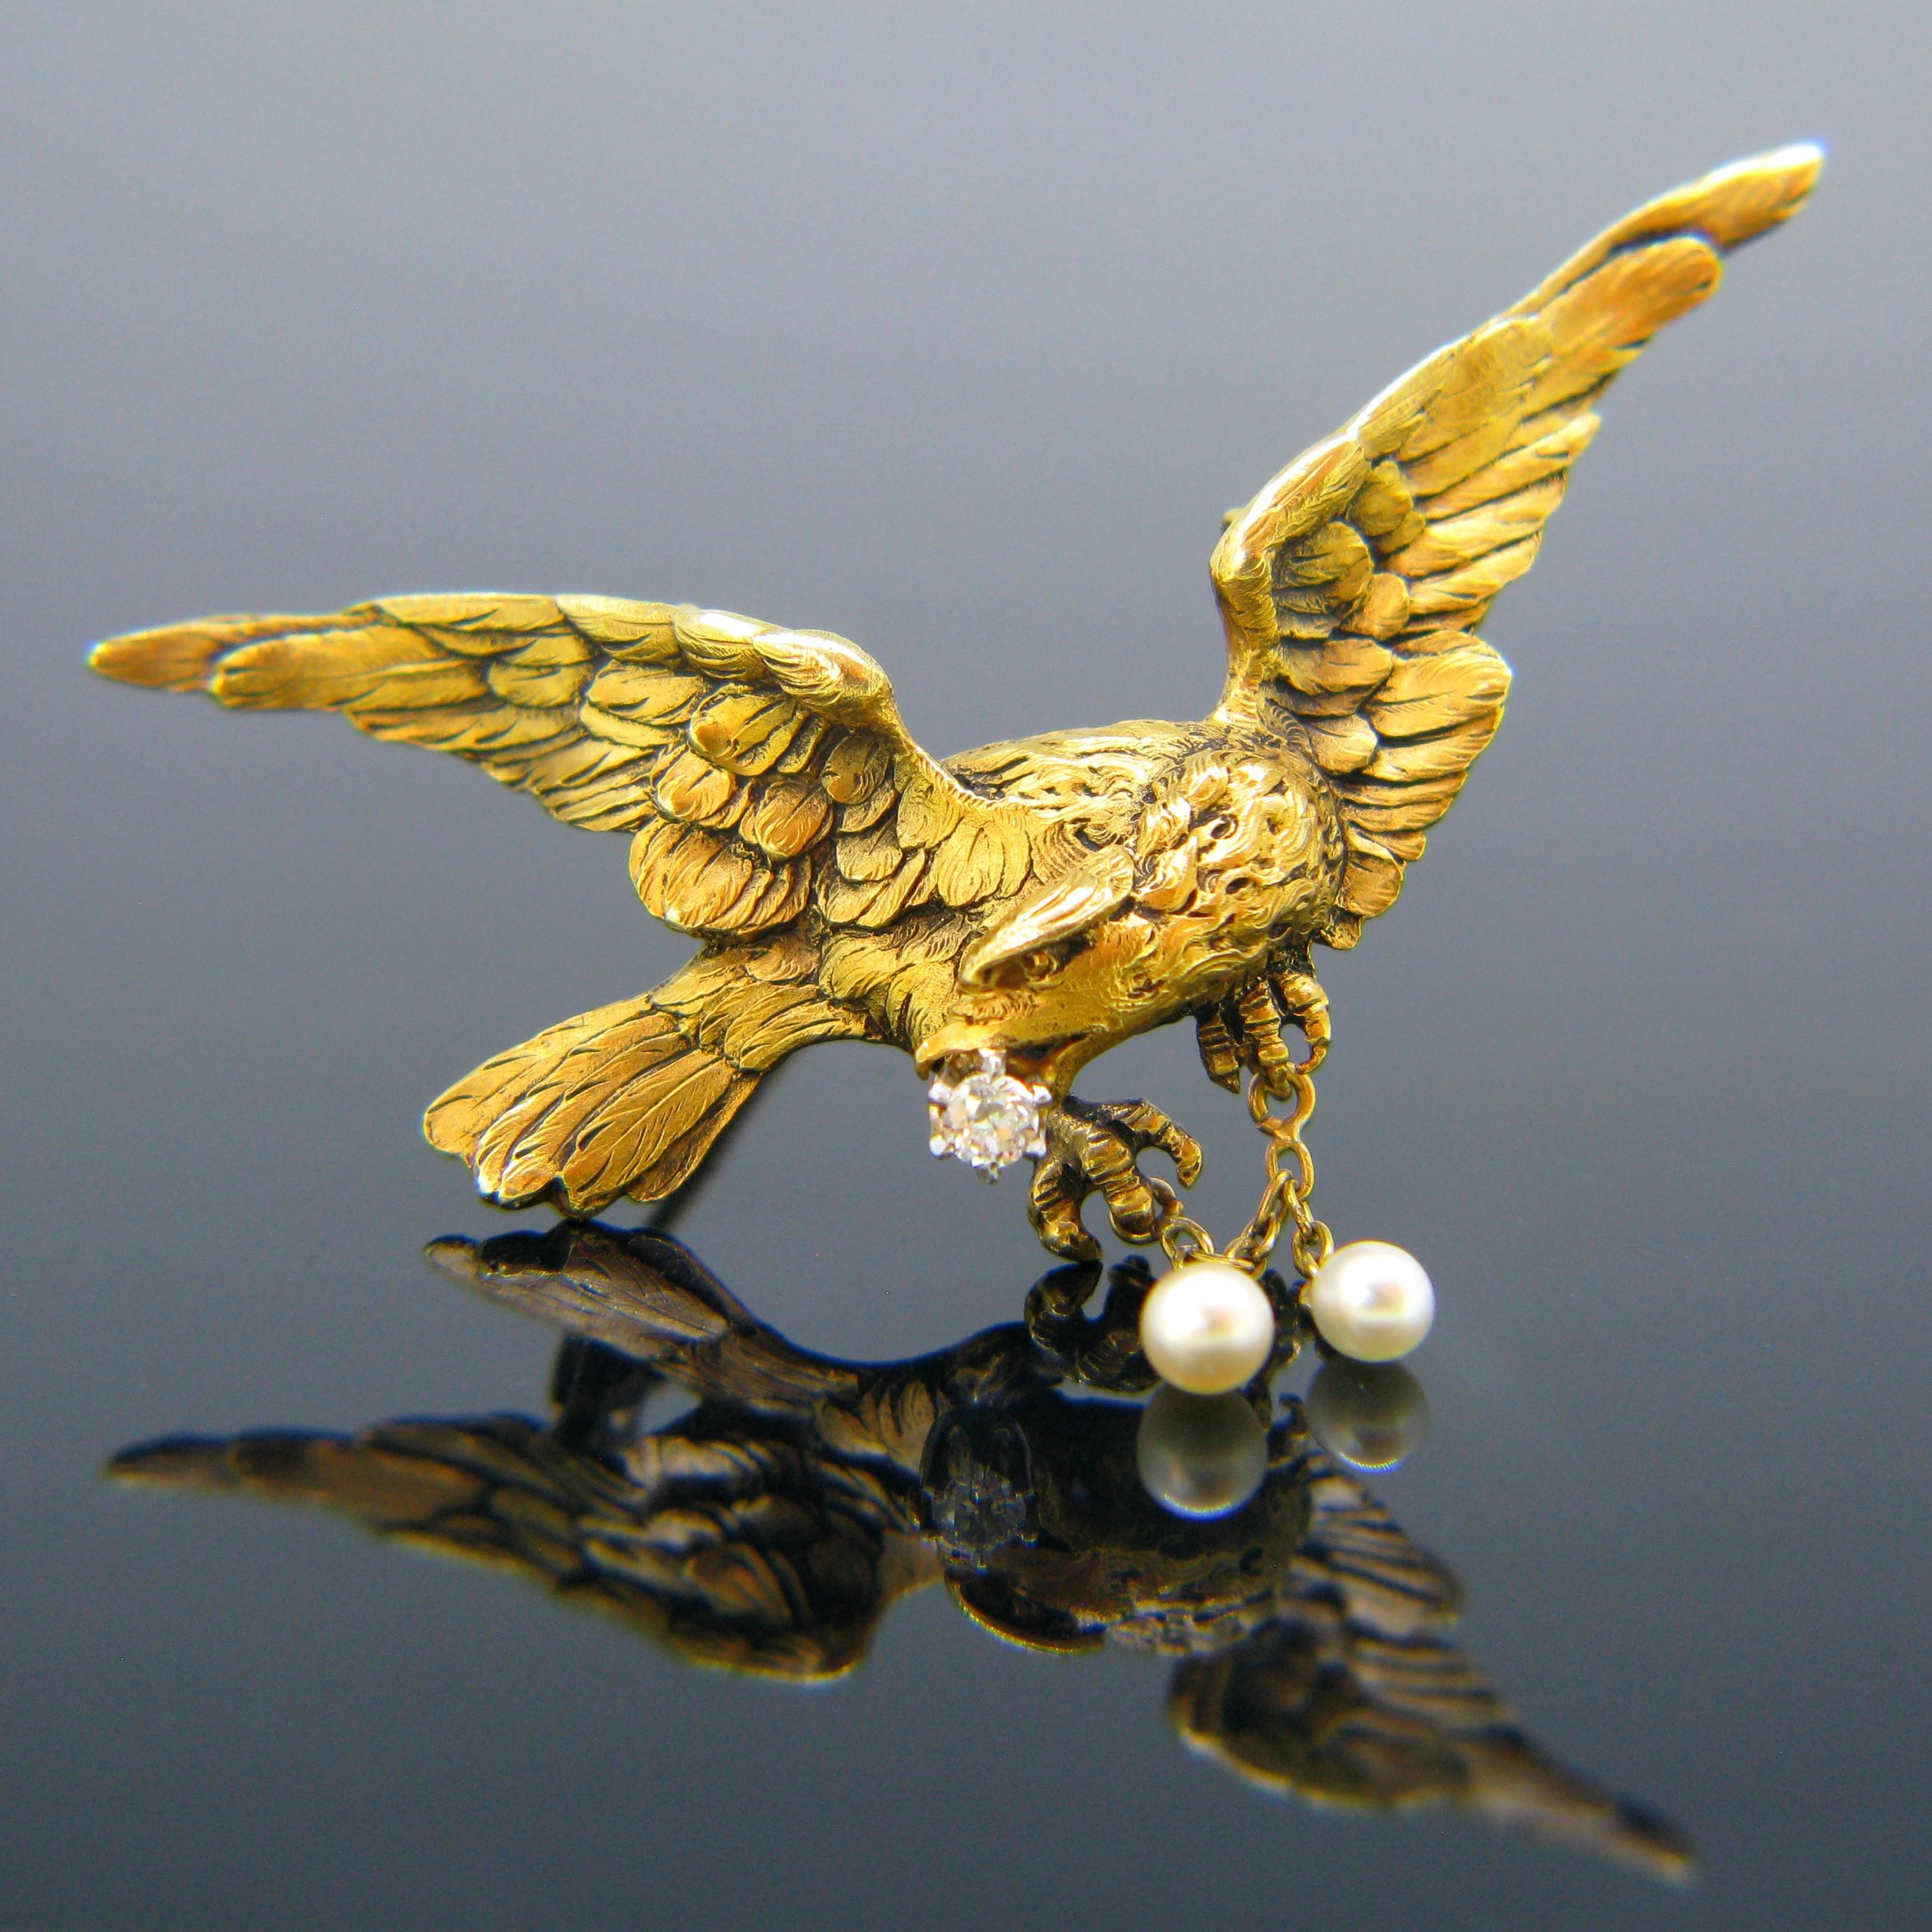 This beautiful pendant/brooch comes directly from the Art Nouveau era. This magnificent eagle sweeps through the sky with a diamond in its beak and dangling pearls in its claws. It is beautifully engraved with a realistic feathery texture on both